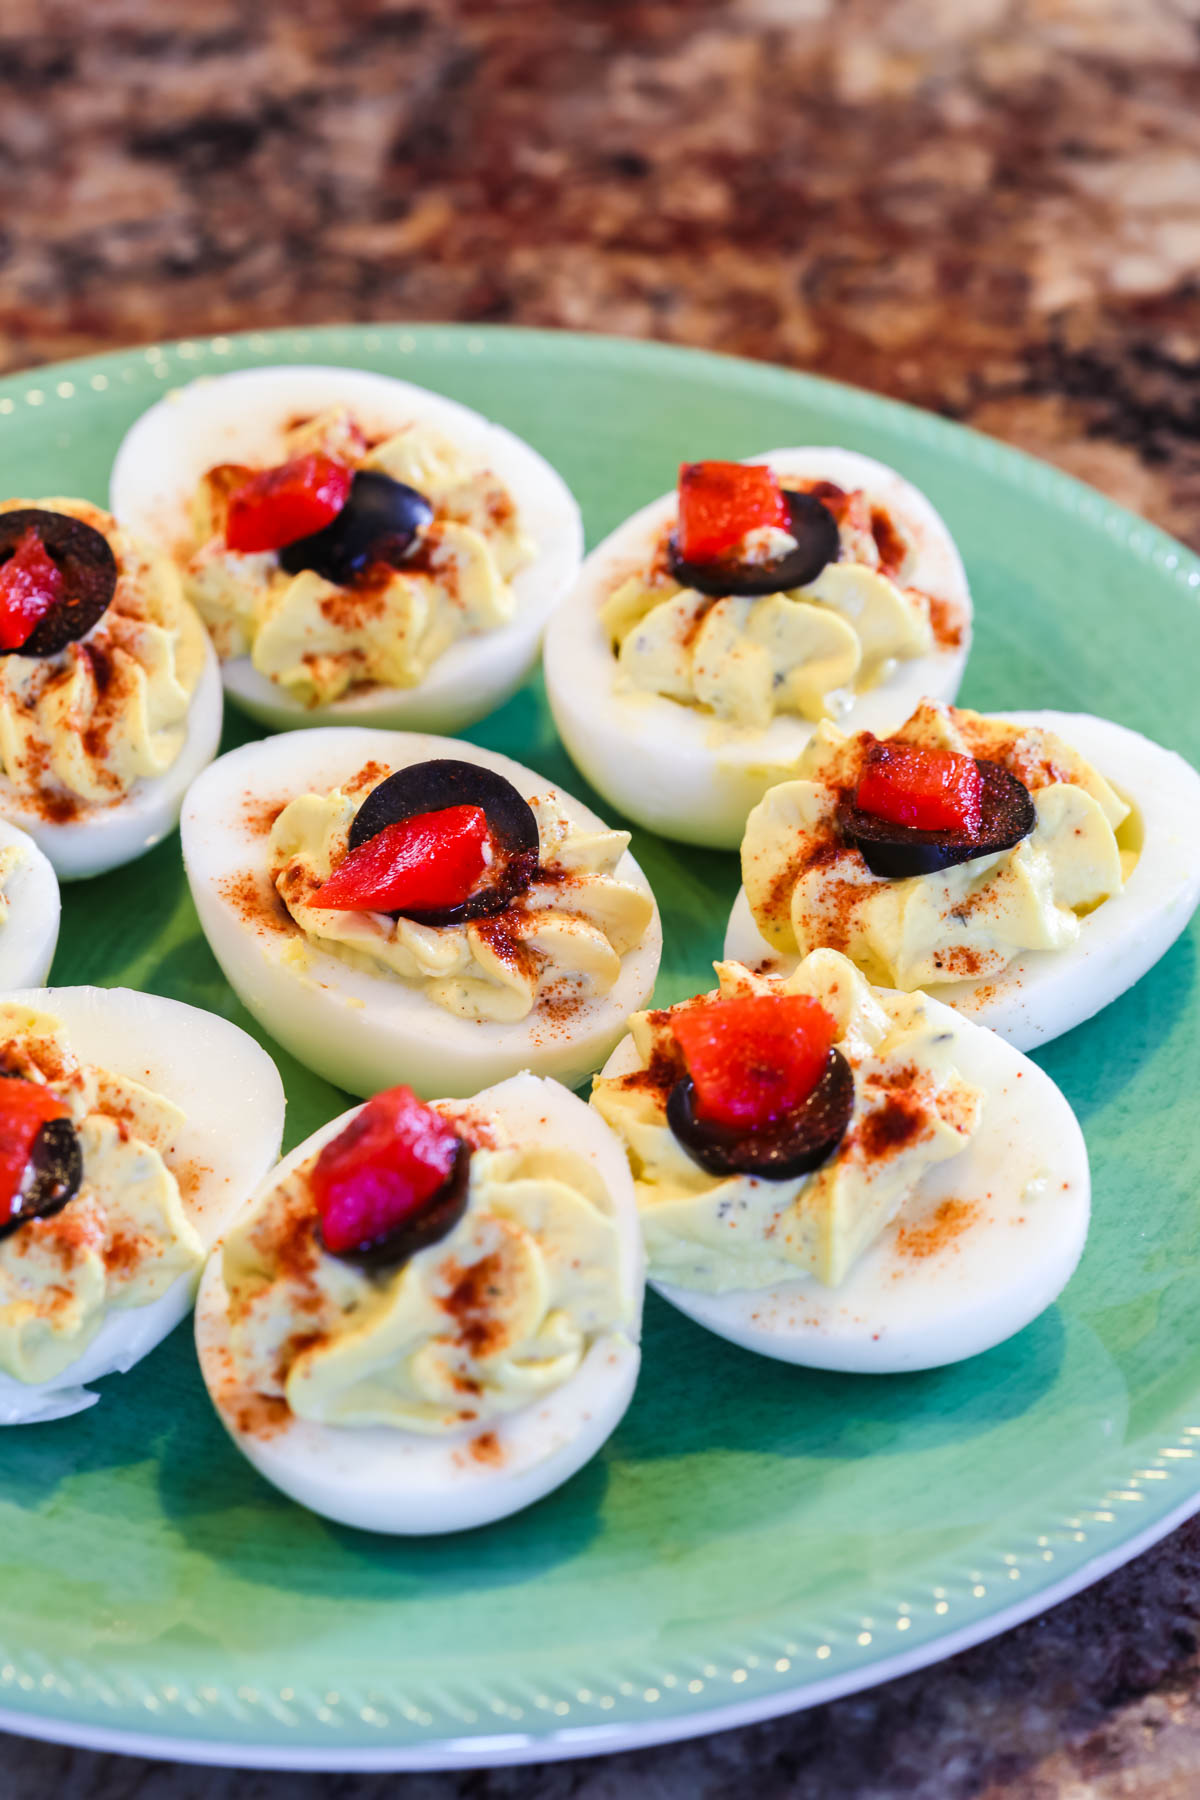 Deviled Eggs without Mayo on a green plate with a blue rim.